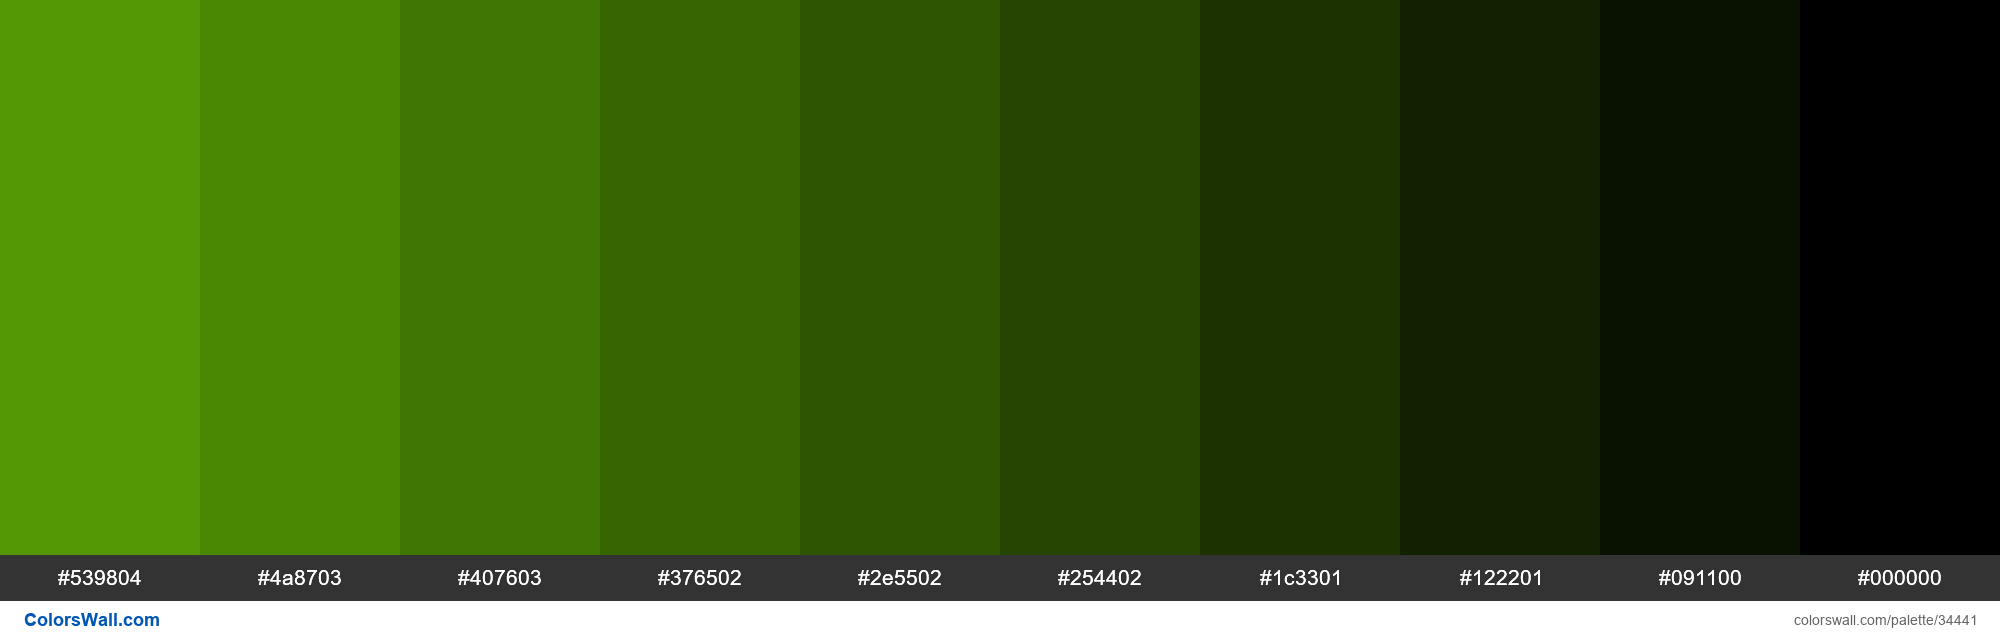 https://colorswall.com/images/palettes/shades-xkcd-color-leaf-green-5ca904-hex-34441-colorswall.png